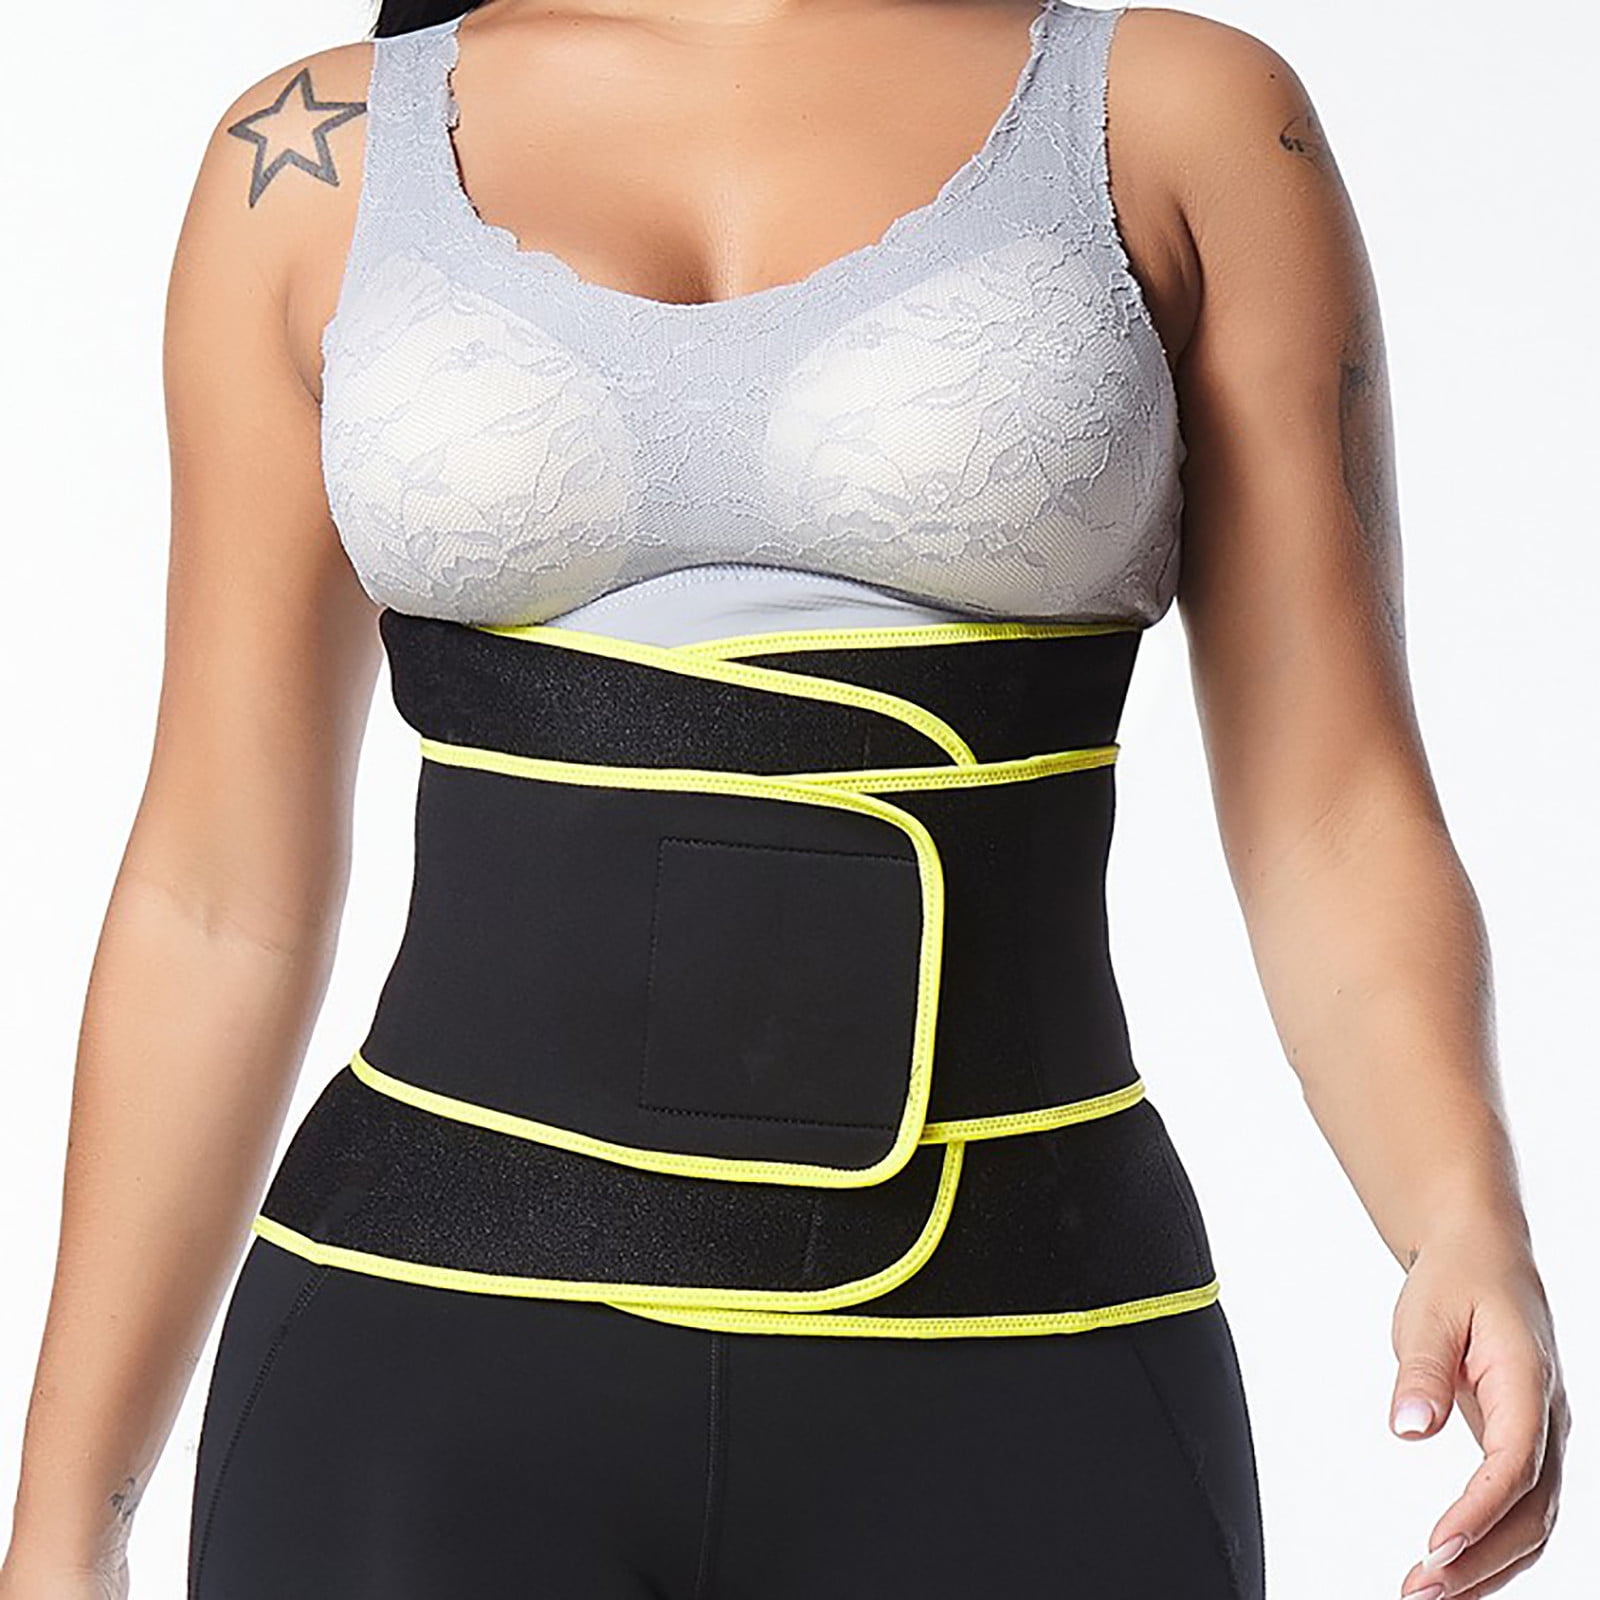 Details about   Arm Slimmer High Waist Trimmer for Weight Loss Thigh Slimmer Adjustable Belts US